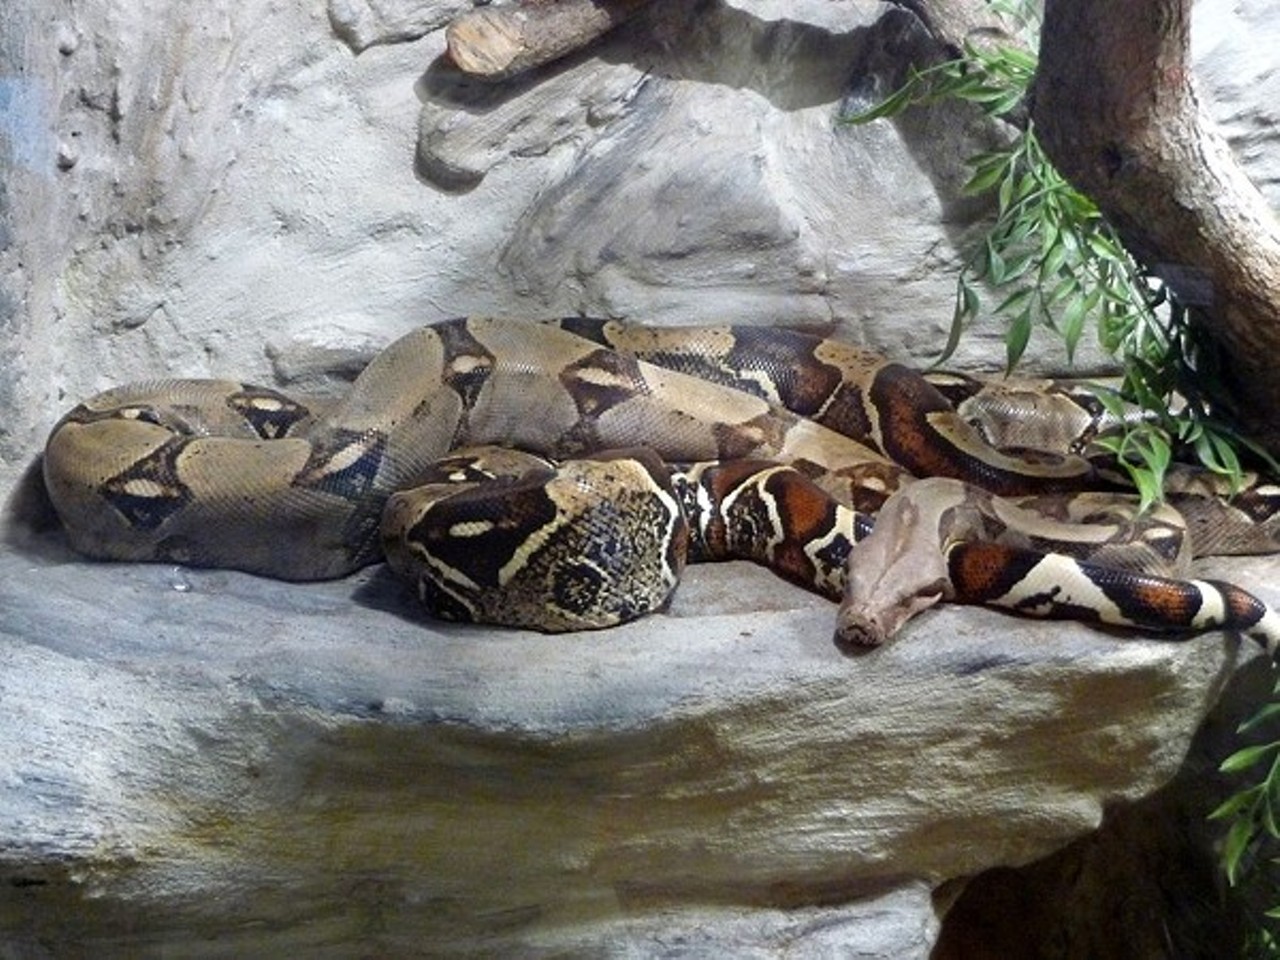  &#147;Pet Boa Constrictor Nearly Strangles Its Ohio Owner, Firefighters Cut Off Snake&#146;s Head&#148;
July 28
Police were forced to decapitate a boa constrictor in Sheffield Lake, after the pet wrapped itself around its owner and started to bite her face. While the boa&#146;s death is an unfortunate loss for the community, its owner can take solace in her 10 other pet snakes (nine pythons, one boa constrictor.)
Photo via Wikipedia